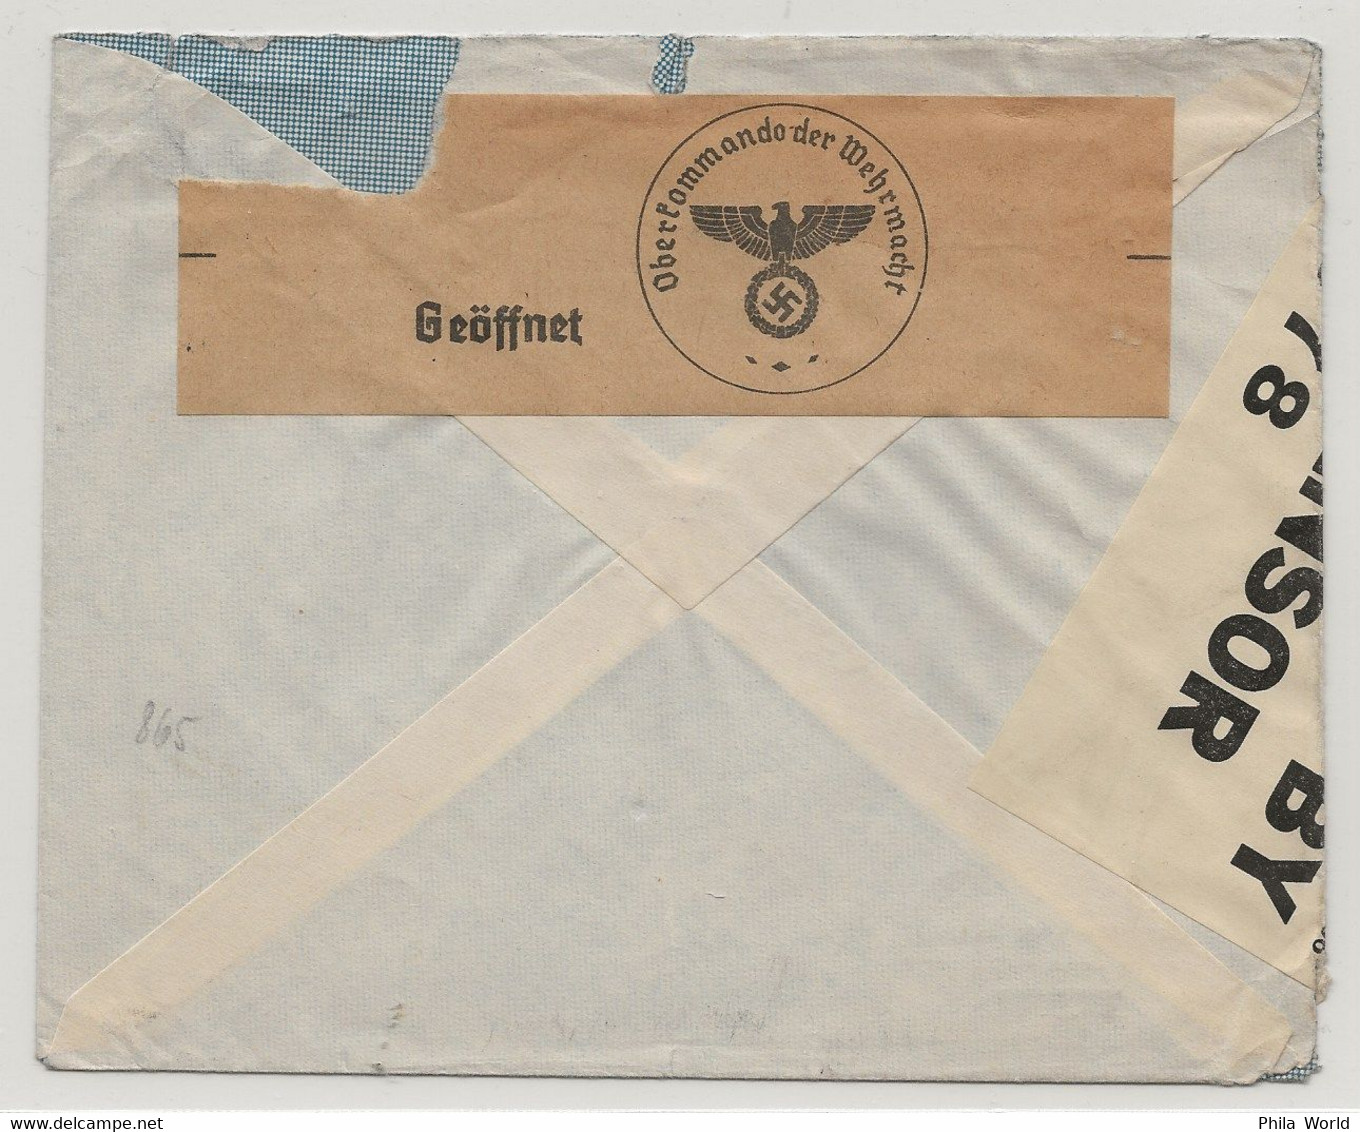 WW2 1940 ARGENTINA Por Vapor OCEANIA Maritime Mail Cover British Censorship 1878 And German Censored To GERMANY - WW2